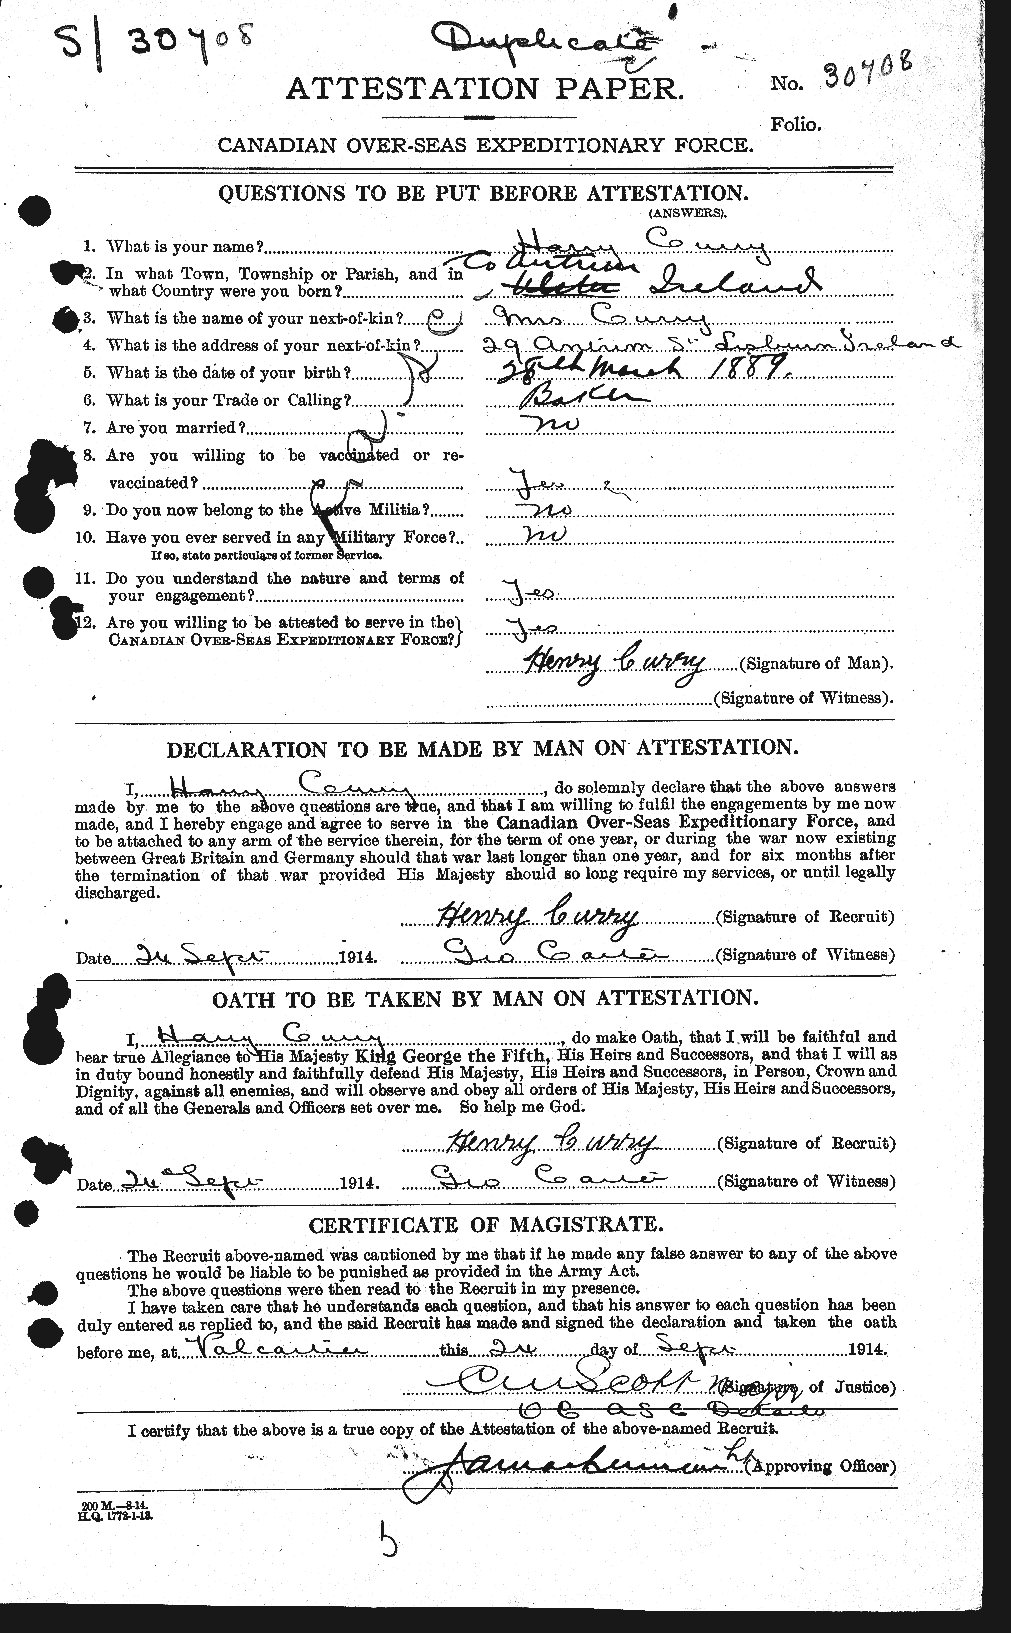 Personnel Records of the First World War - CEF 071174a